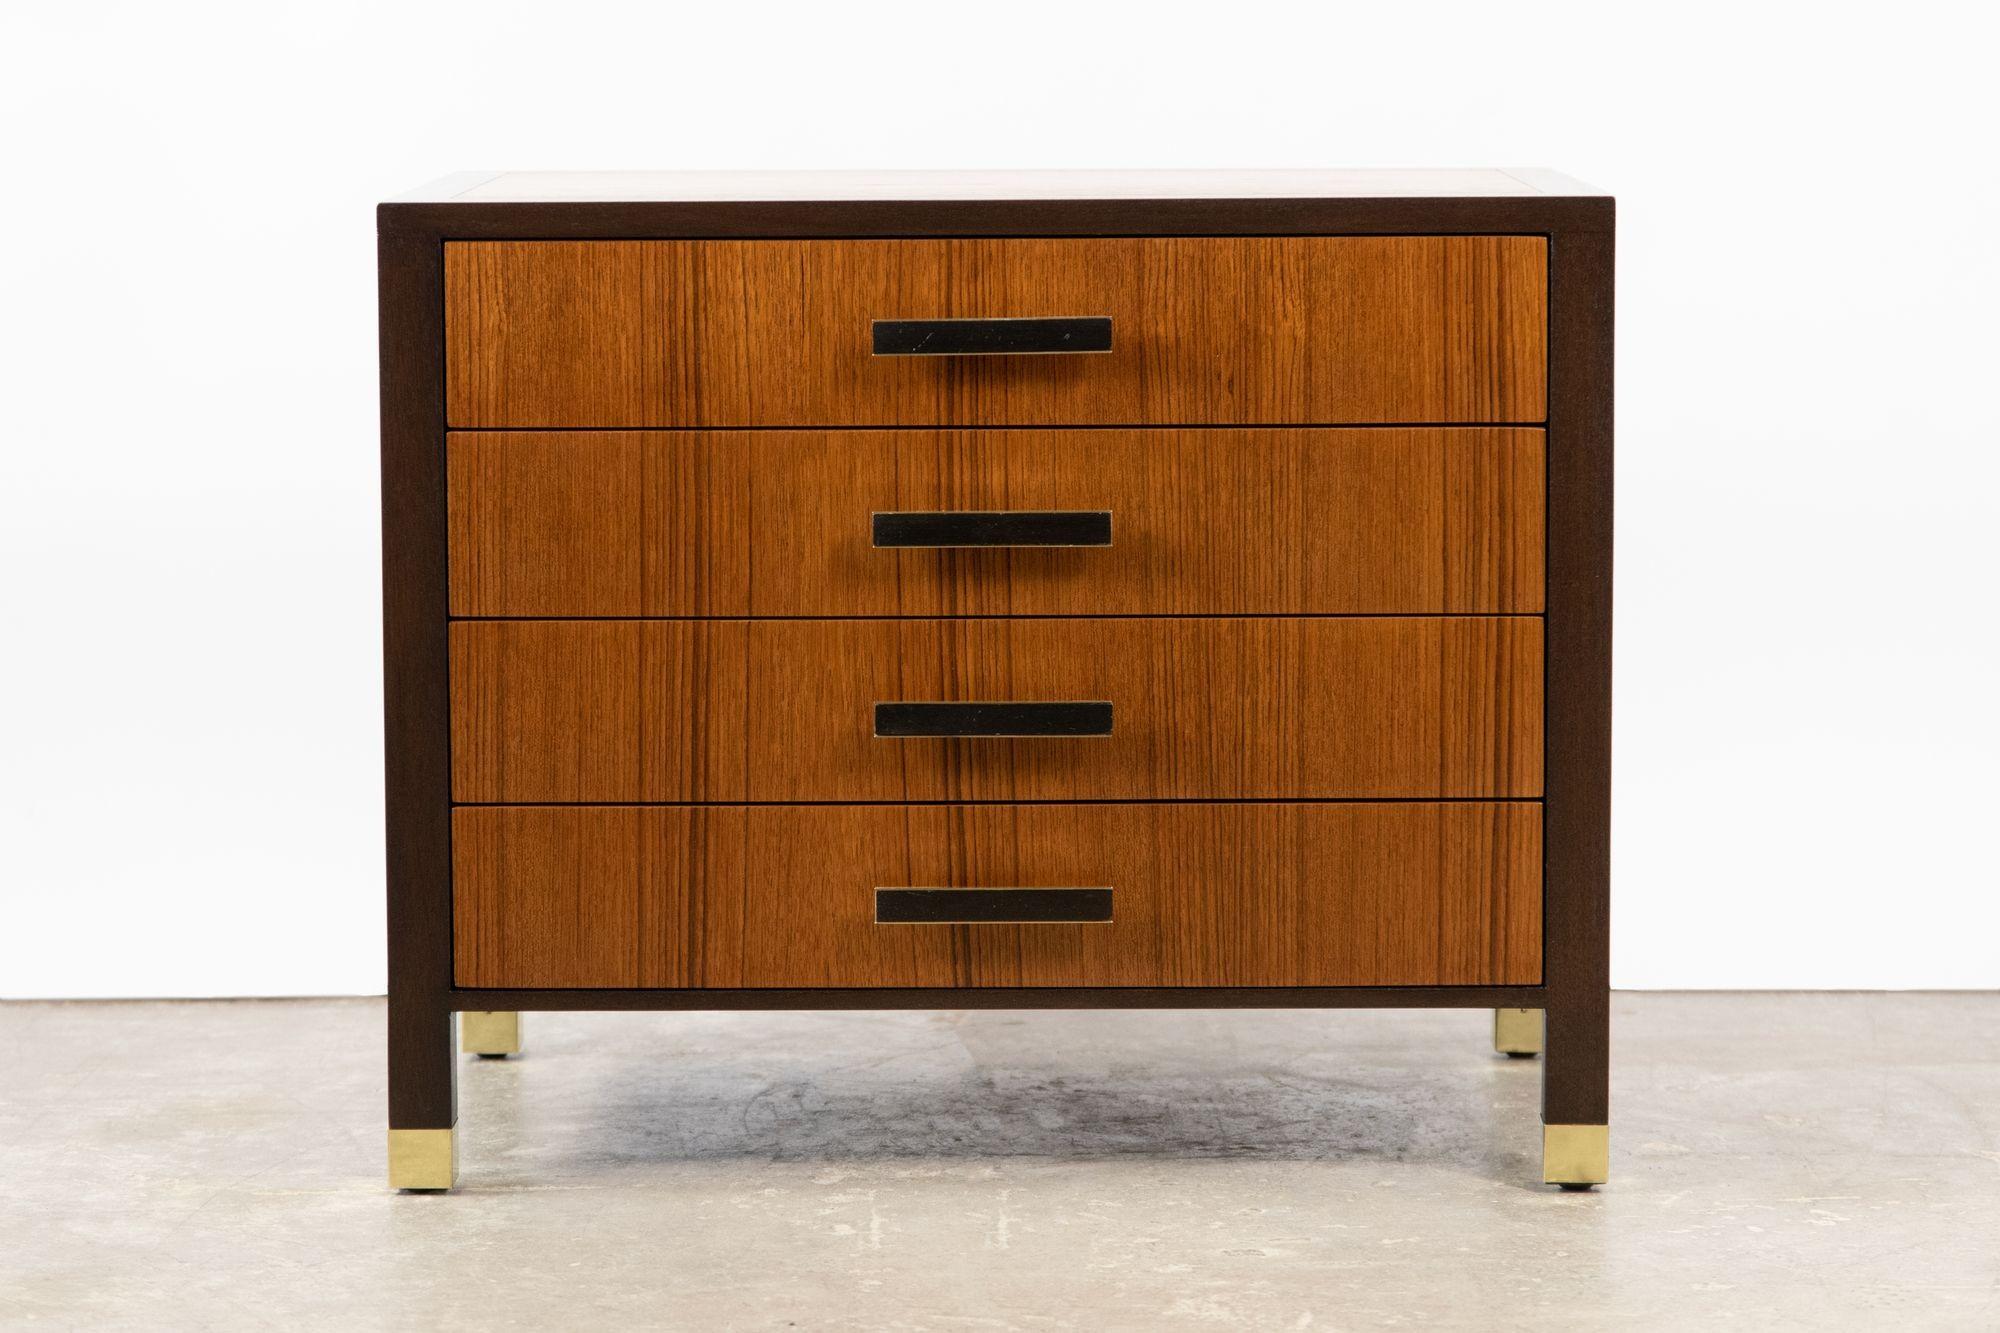 Beautiful 4-drawer miniature cabinet by Harvey Probber. It would serve perfectly as a nightstand or an end table. The chest consists of a solid mahogany frame finished in espresso lacquer with four teak drawers and inset teak panels.